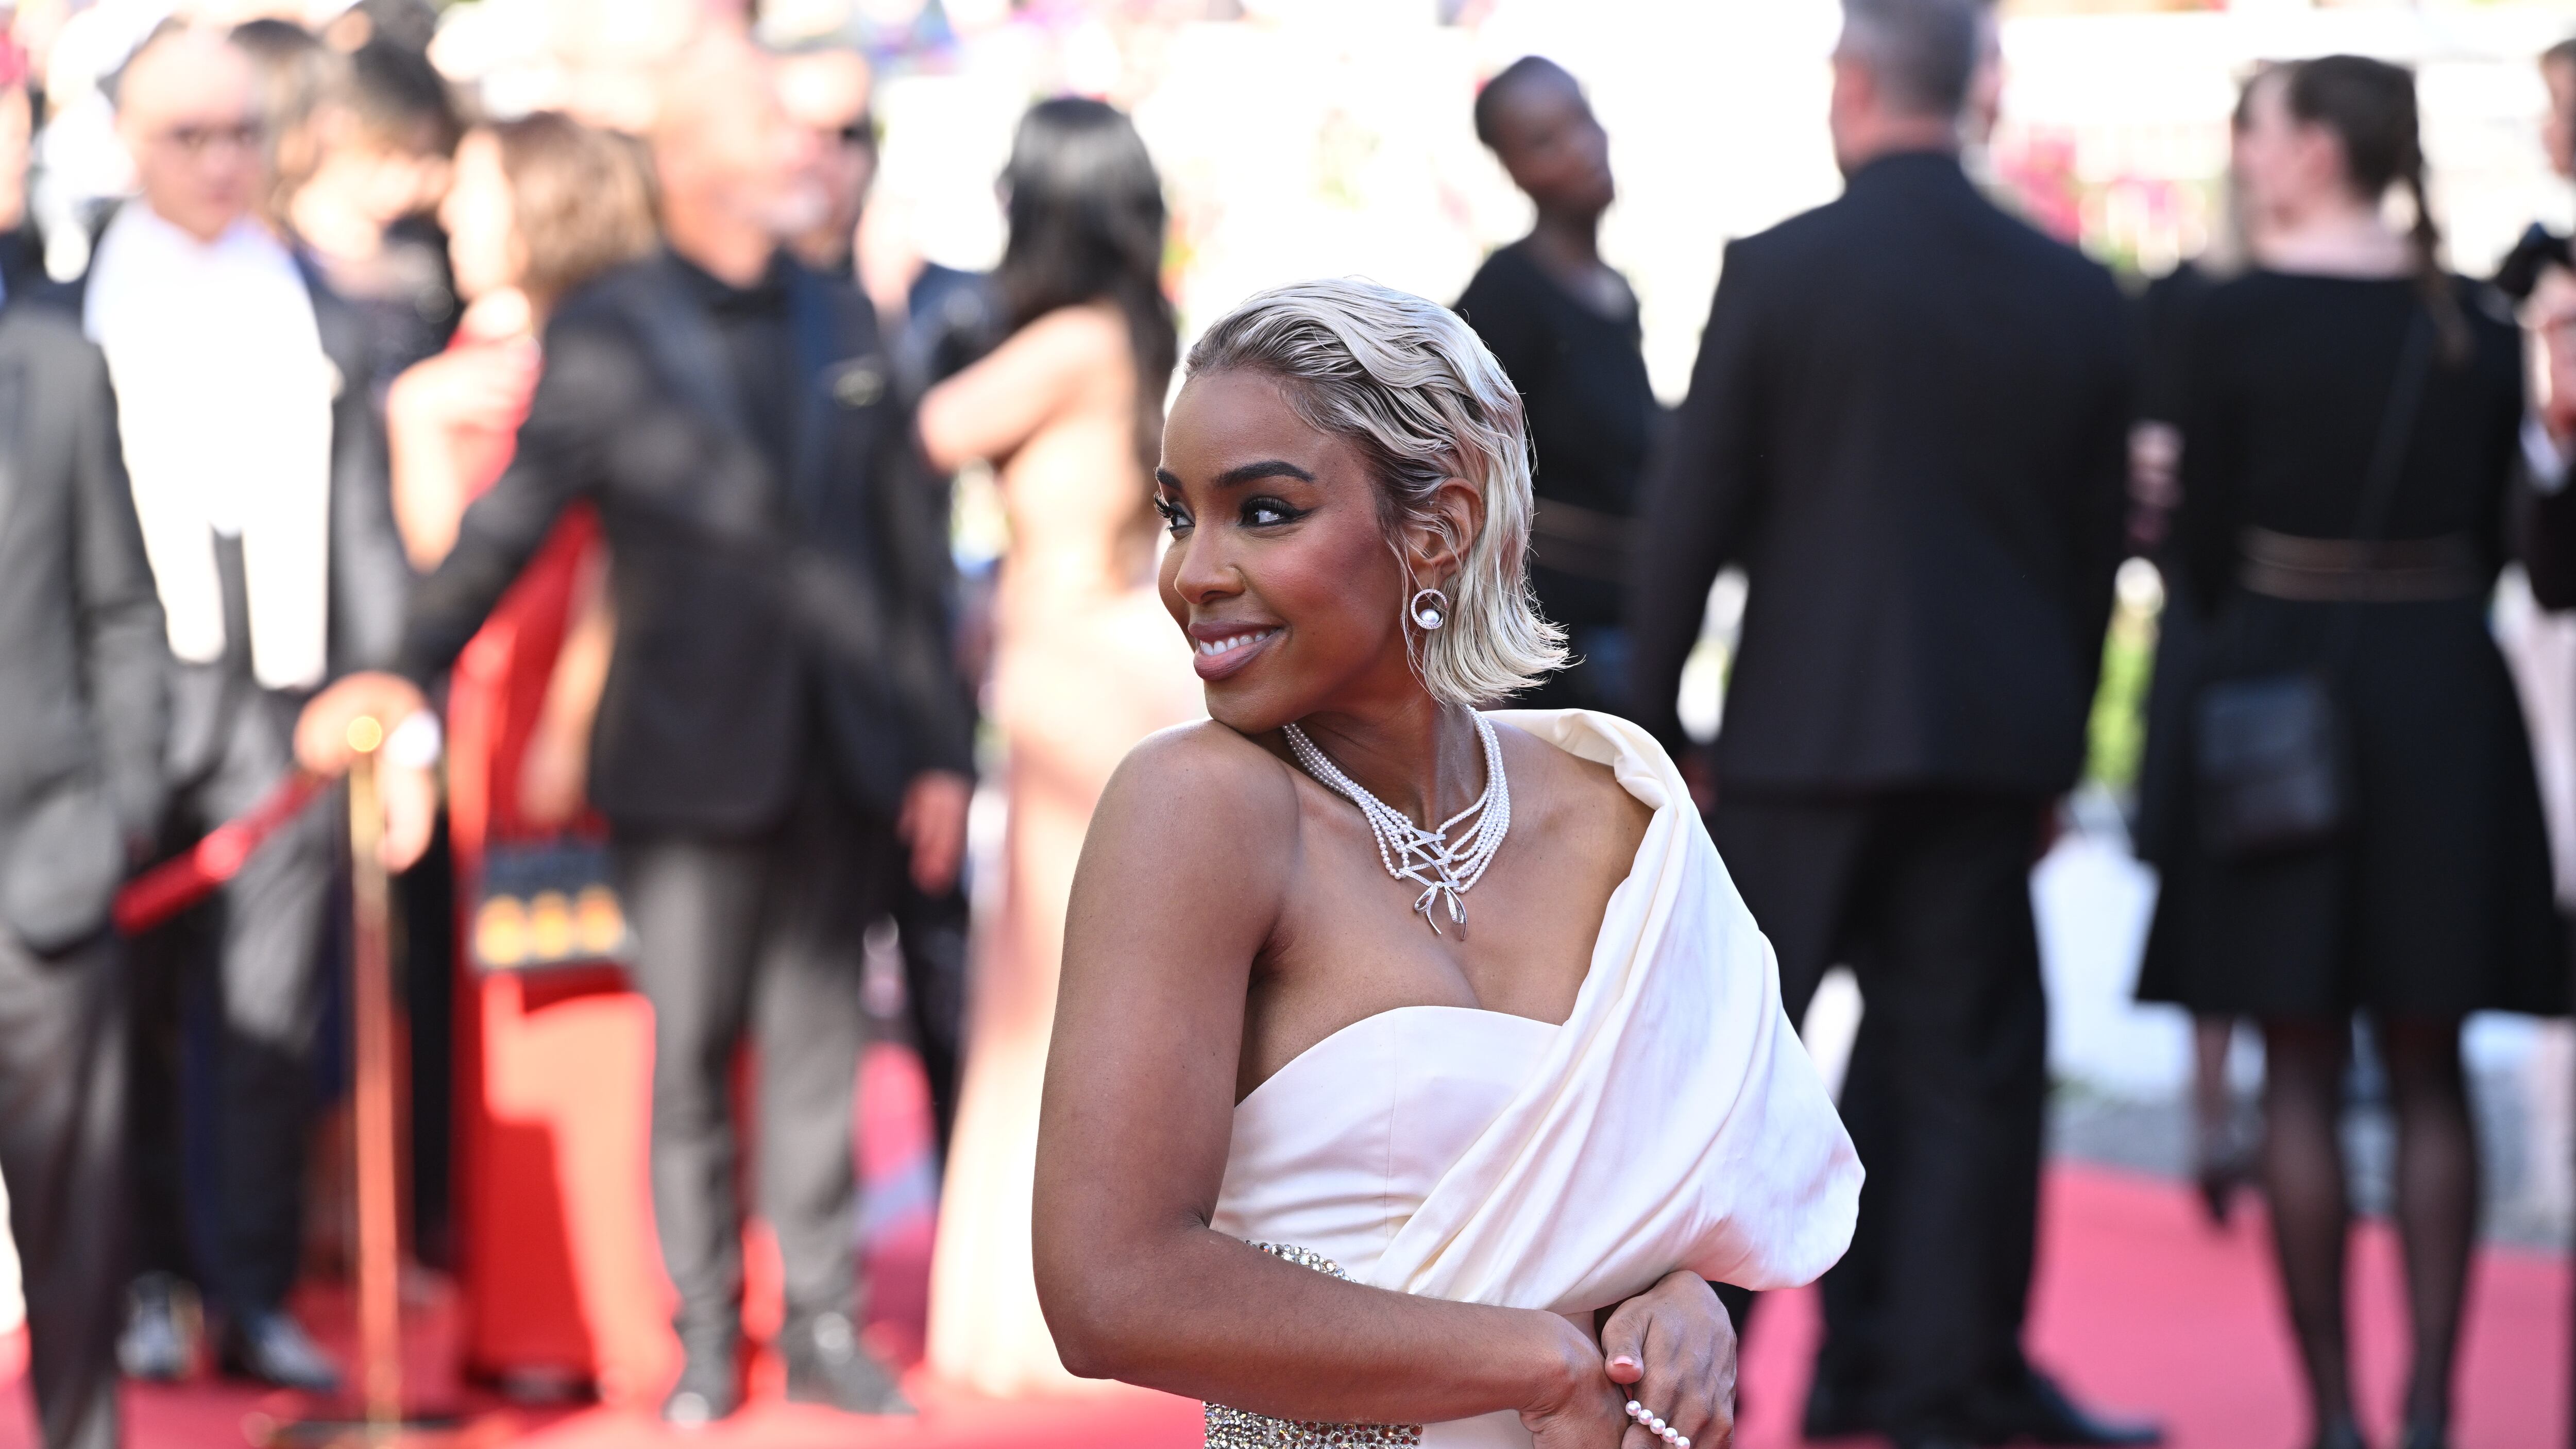 Kelly Rowland responds to Cannes incident with security guard